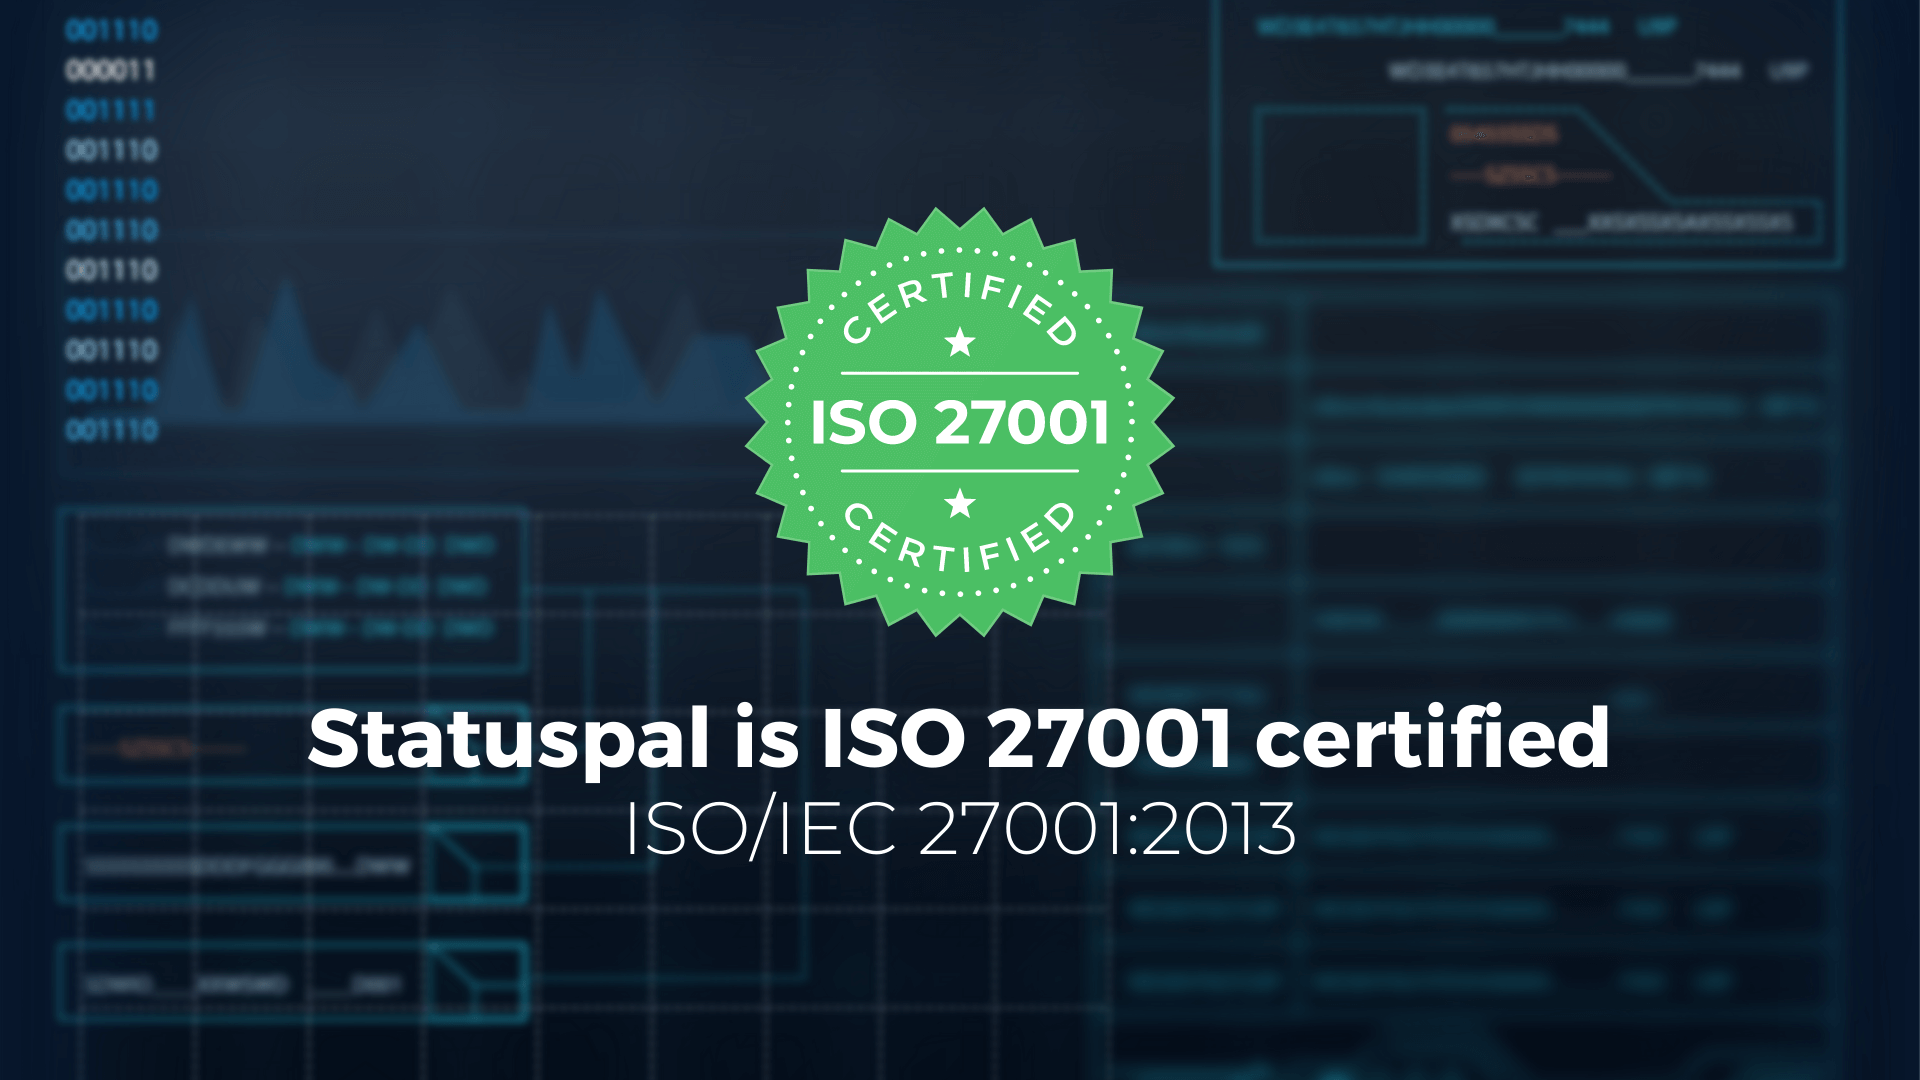 Statuspal is officially ISO 27001 Certified.